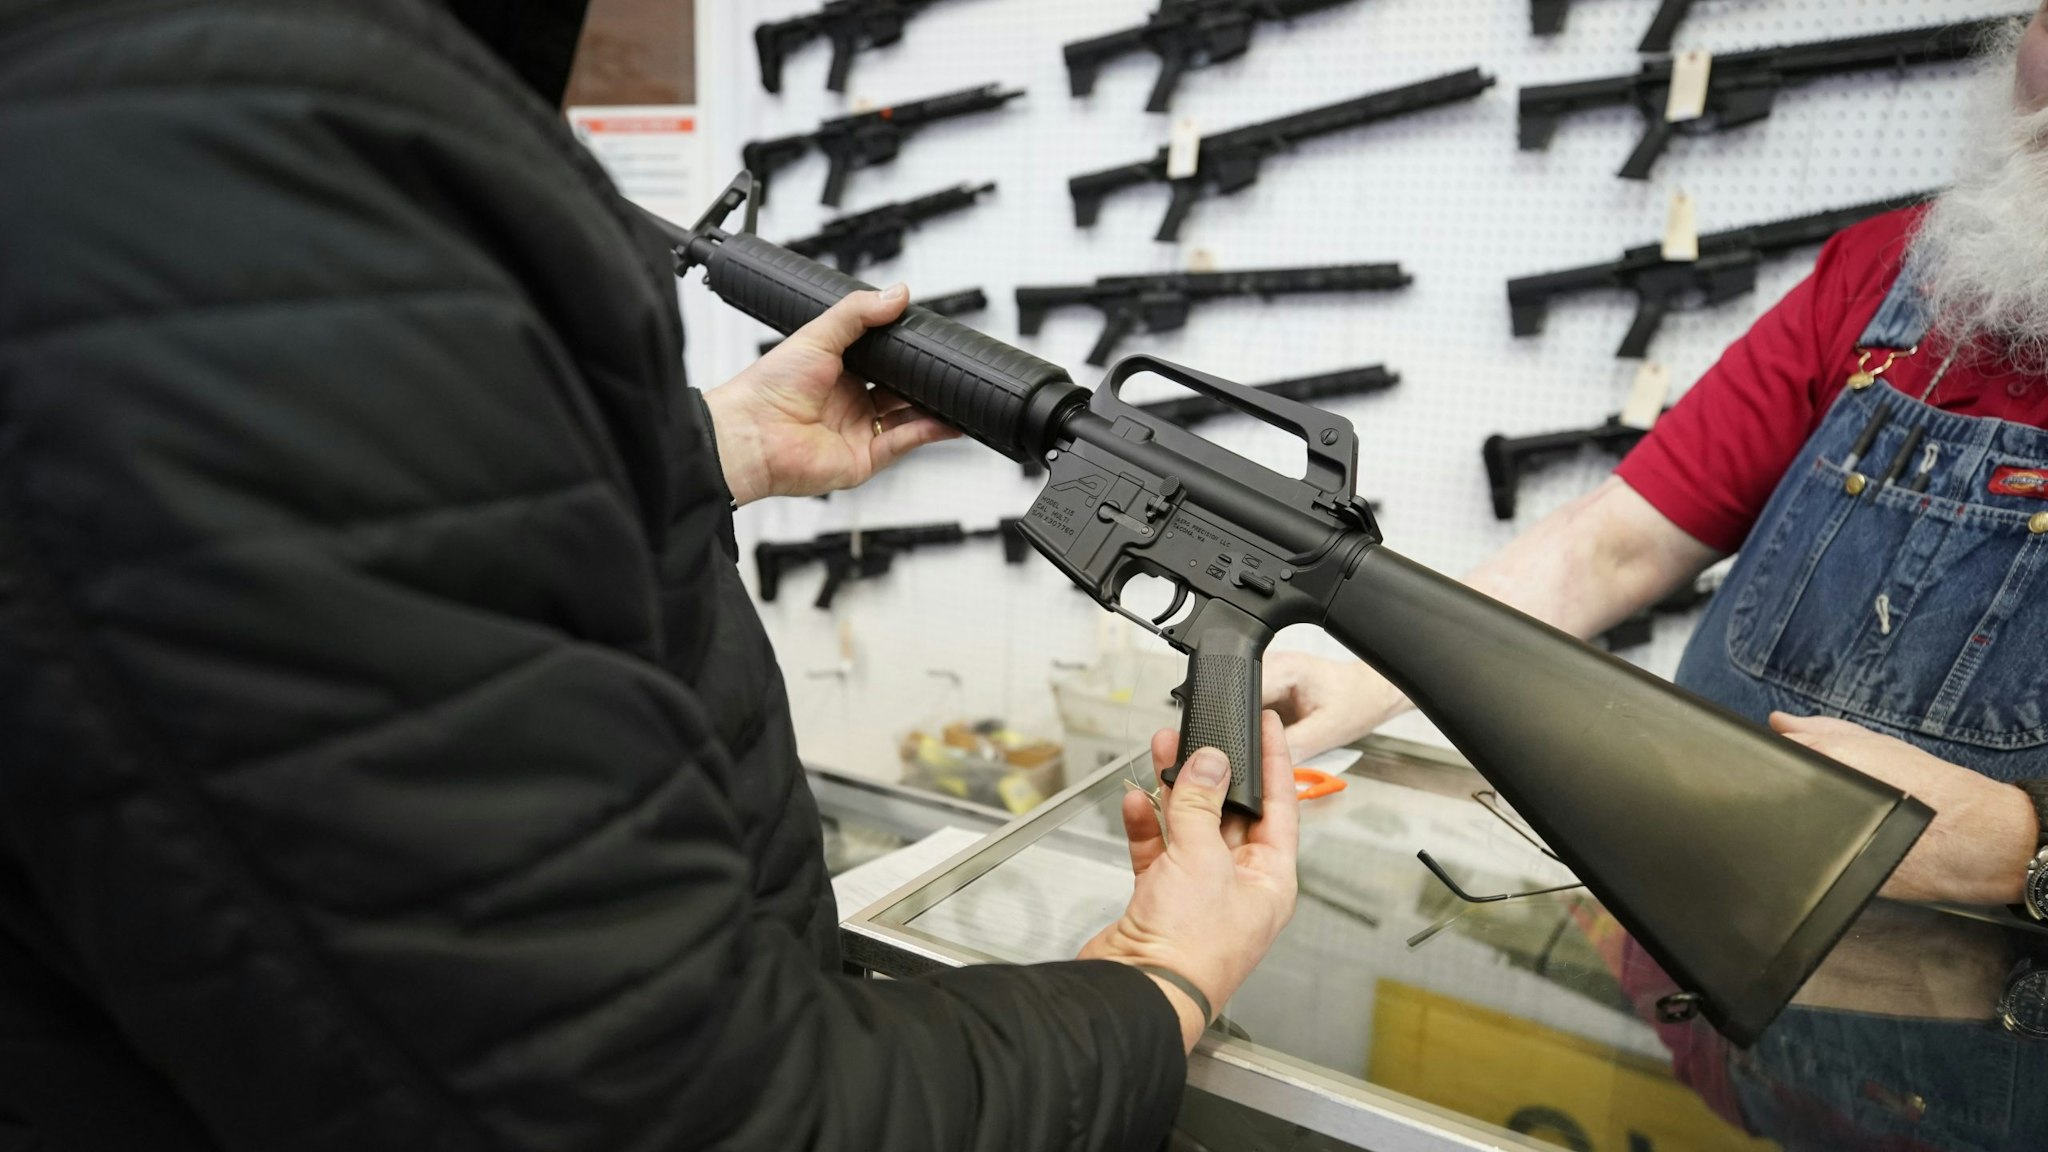 A salesperson shows an AR-15 rifle to a customer at a store in Orem, Utah, U.S., on Thursday, March 25, 2021. Two mass shootings in one week are giving Democrats new urgency to pass gun control legislation, but opposition from Republicans in the Senate remains the biggest obstacle to any breakthrough in the long-stalled debate.